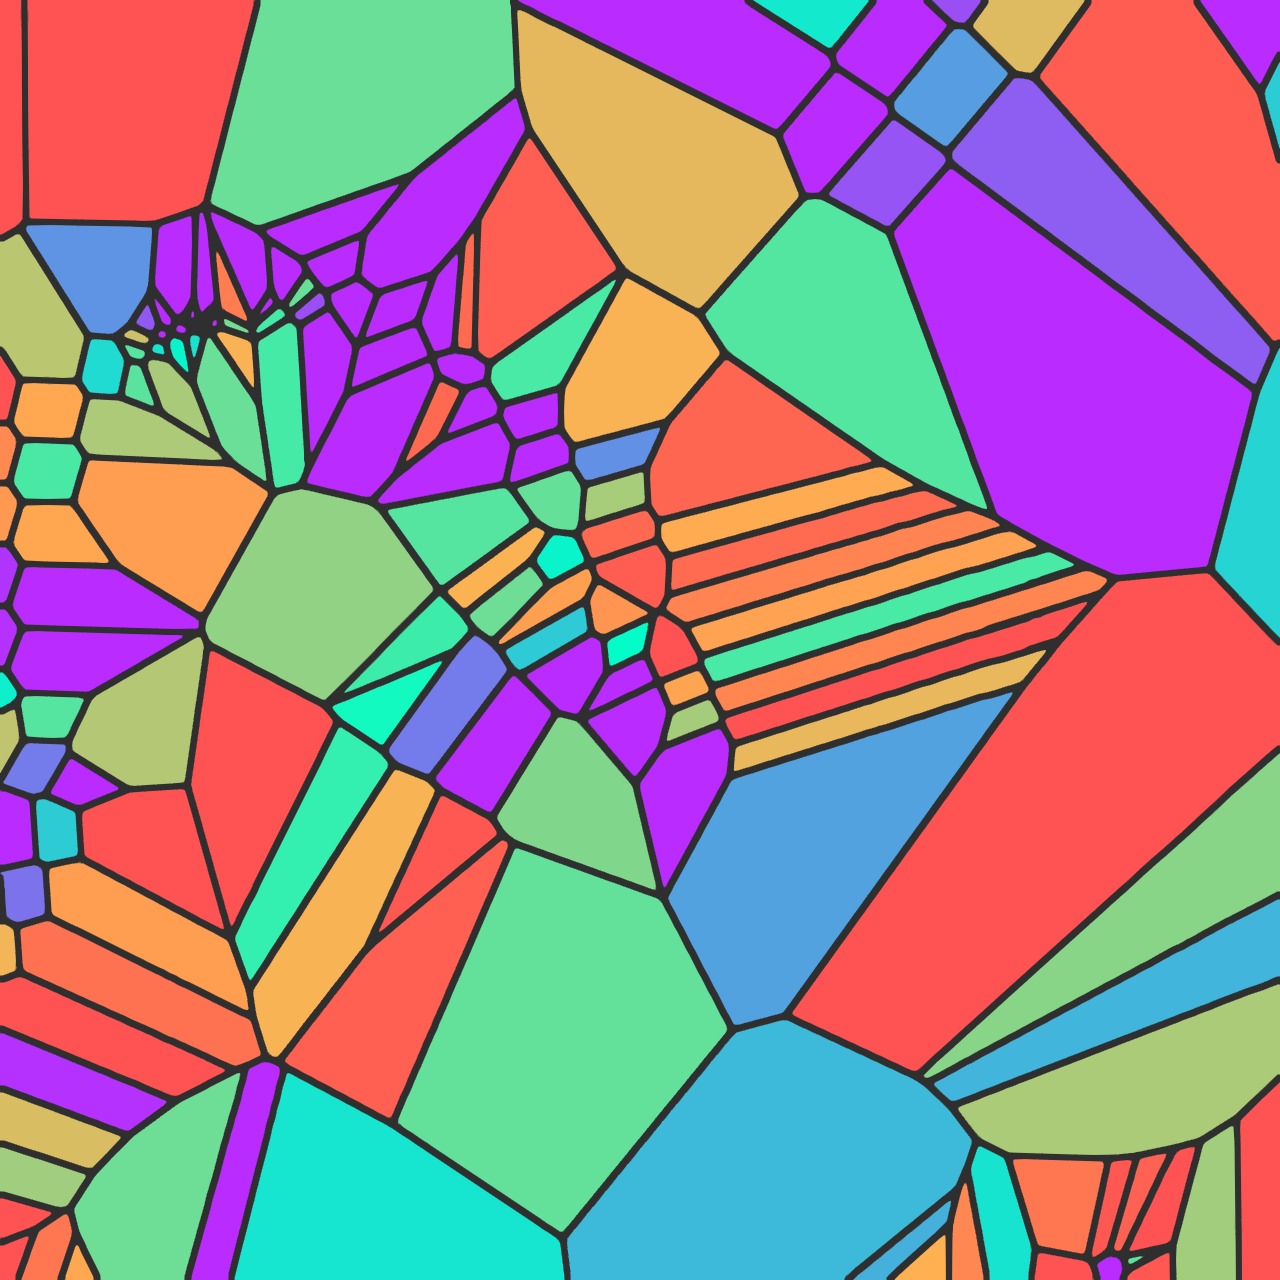 Voronoi pattern produced by Code